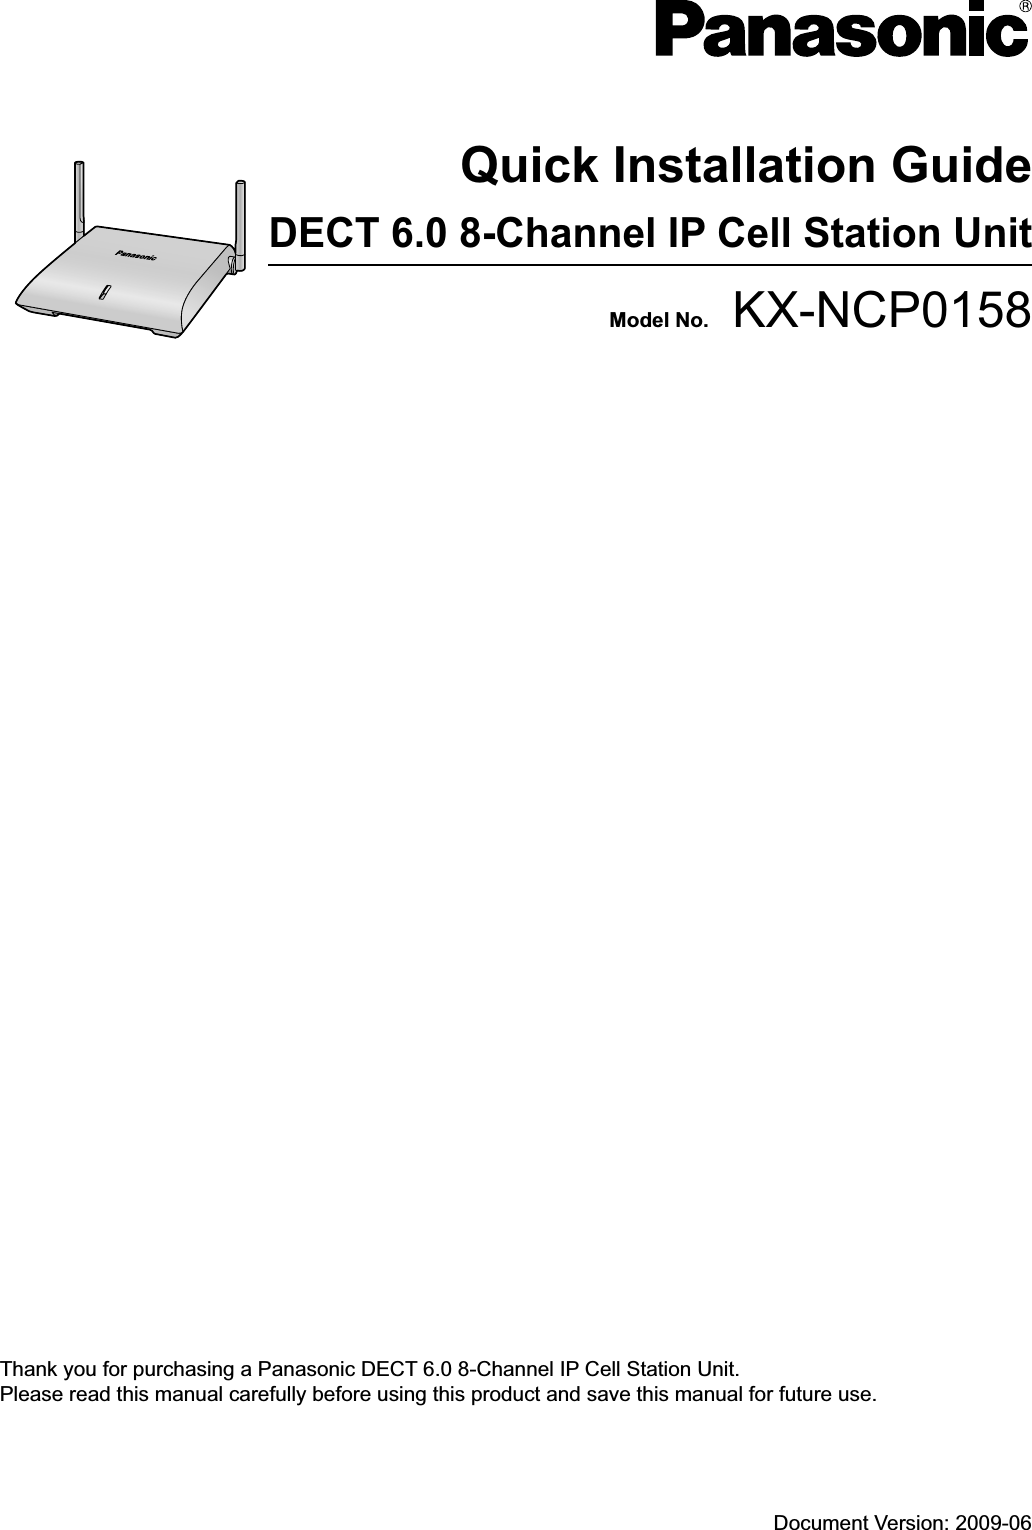 Model No.    KX-NCP0158DECT 6.0 8-Channel IP Cell Station UnitQuick Installation GuideDocument Version: 2009-06Thank you for purchasing a Panasonic DECT 6.0 8-Channel IP Cell Station Unit.Please read this manual carefully before using this product and save this manual for future use.